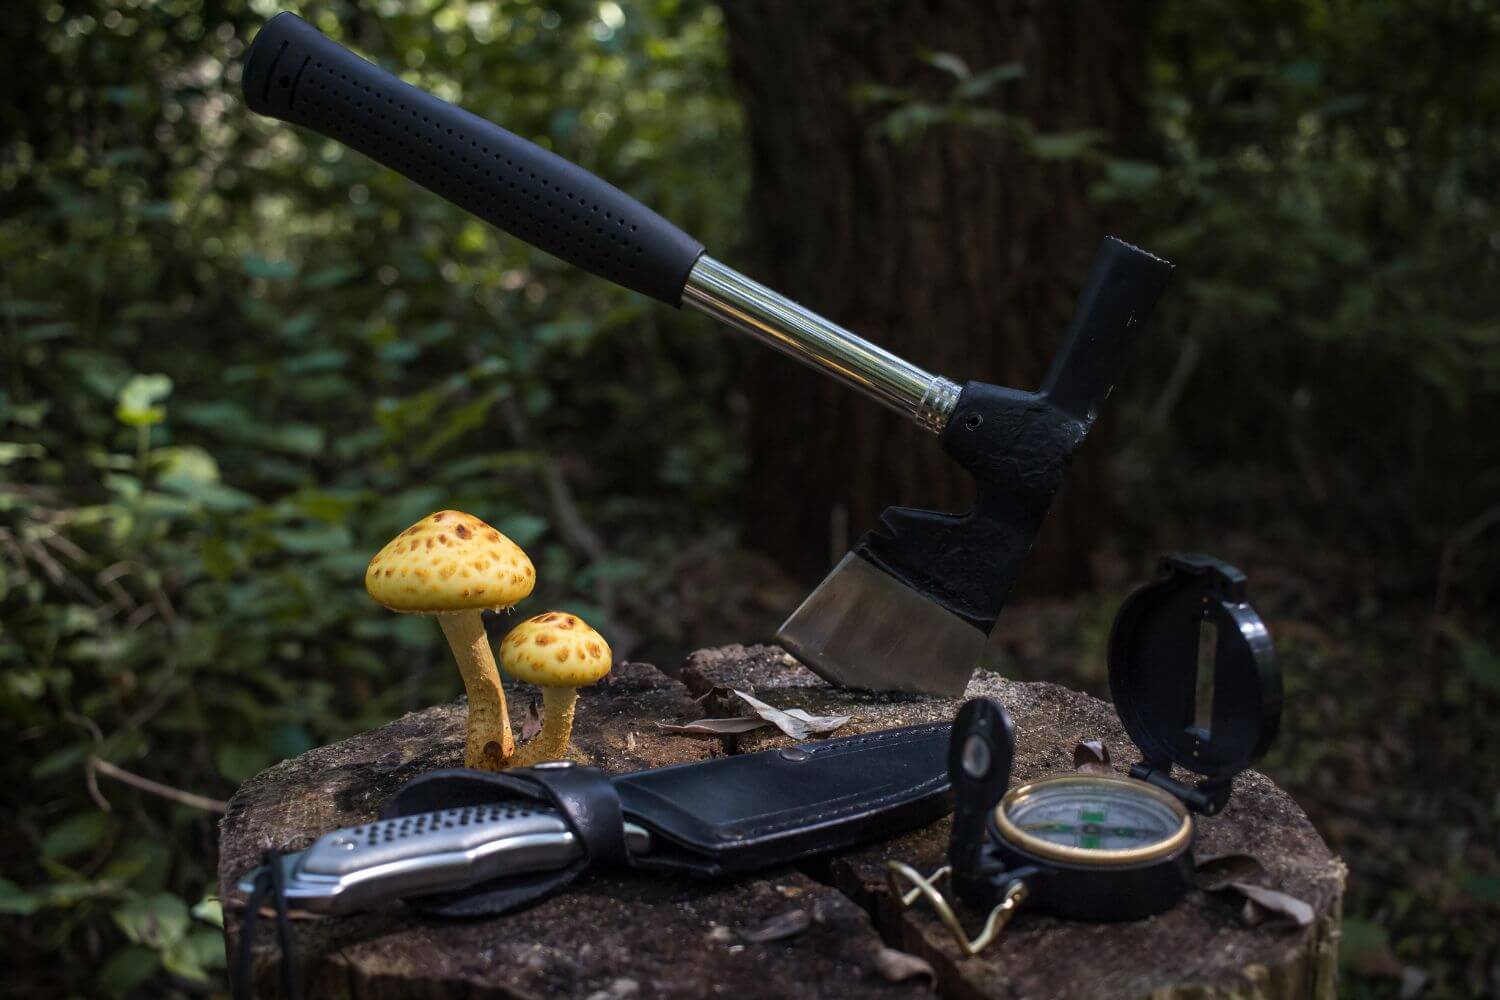 Survival camping gear placed on a tree stump next to two yellow mushrooms